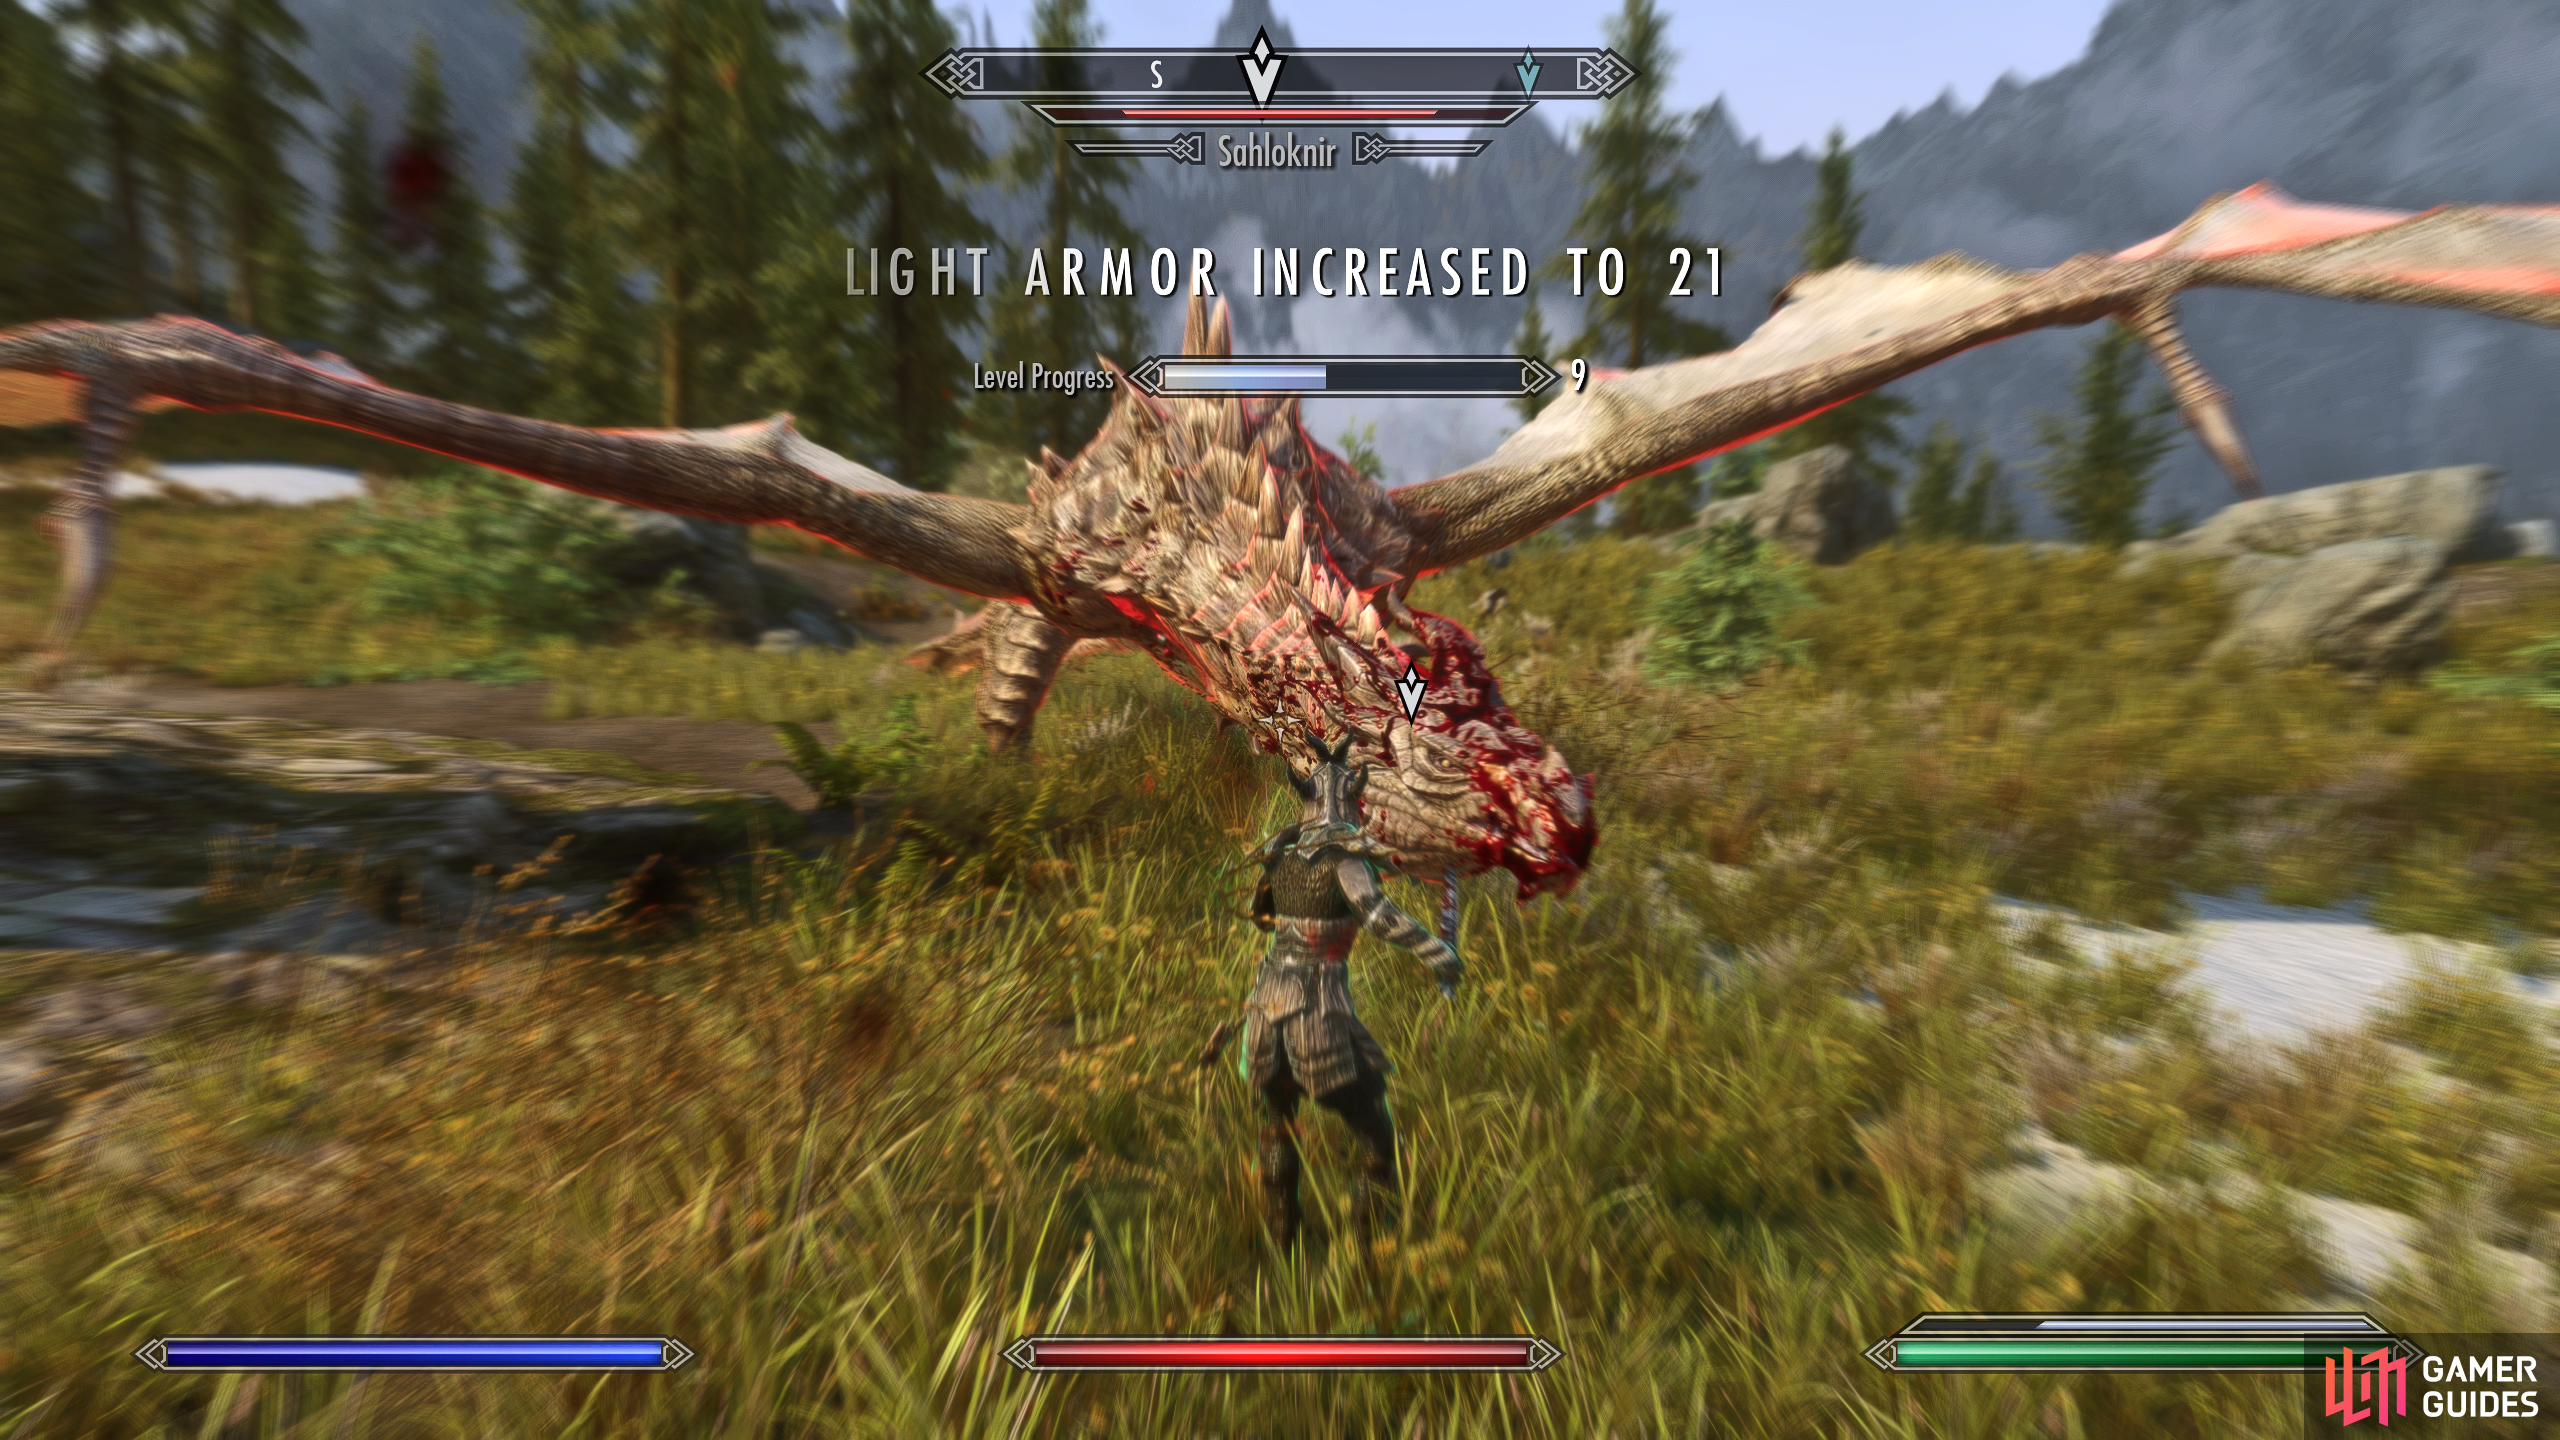 When the dragon is on the ground, hit it with melee attacks as quickly as possible.